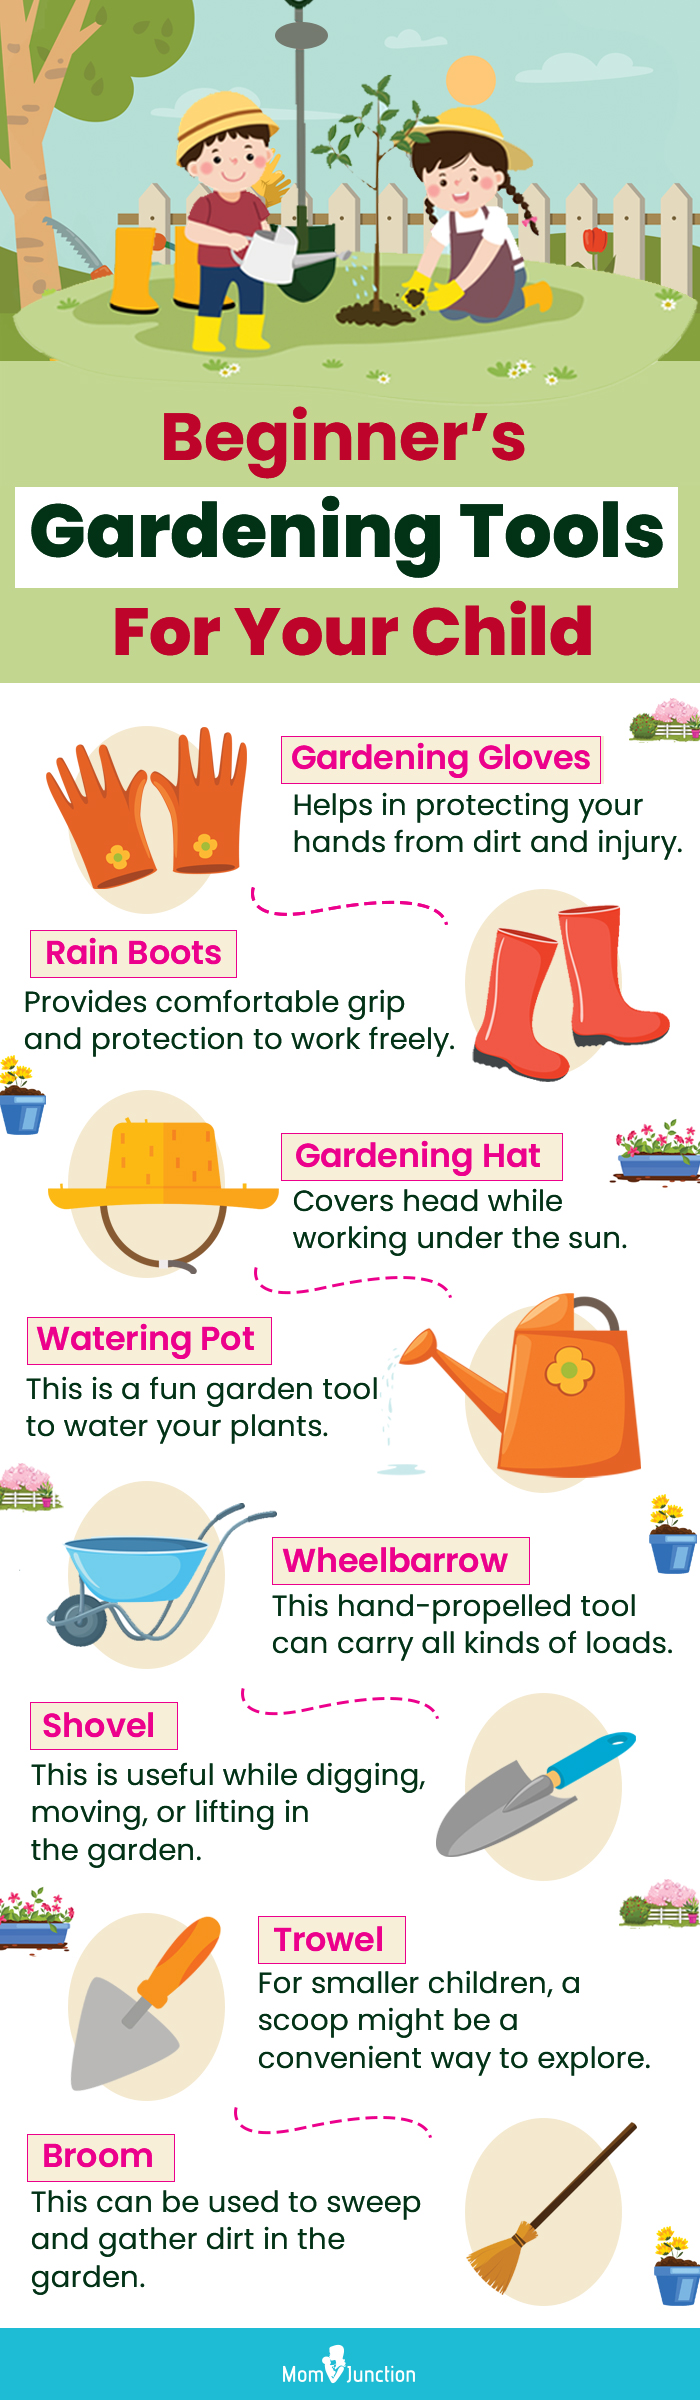 beginner's gardening tools for your child (infographic)